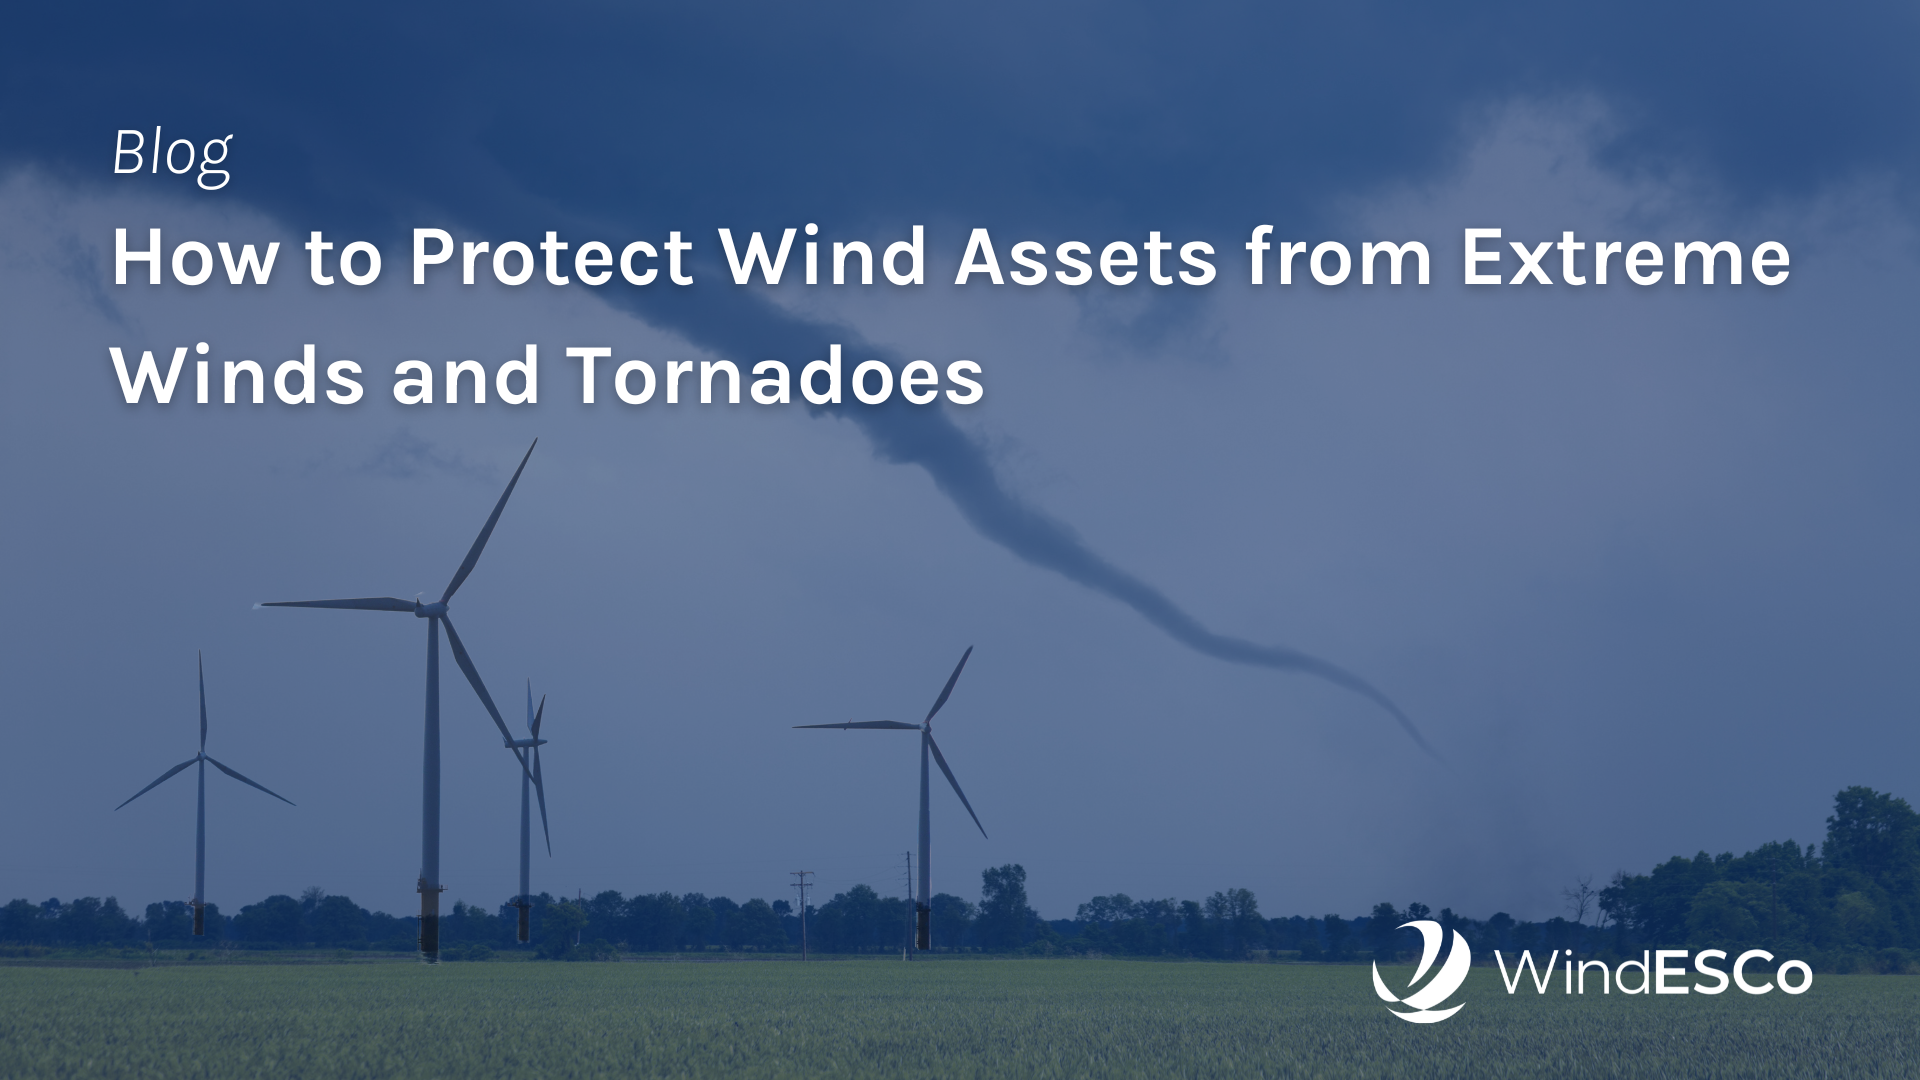 social wind turbines can protect them from tornado damage